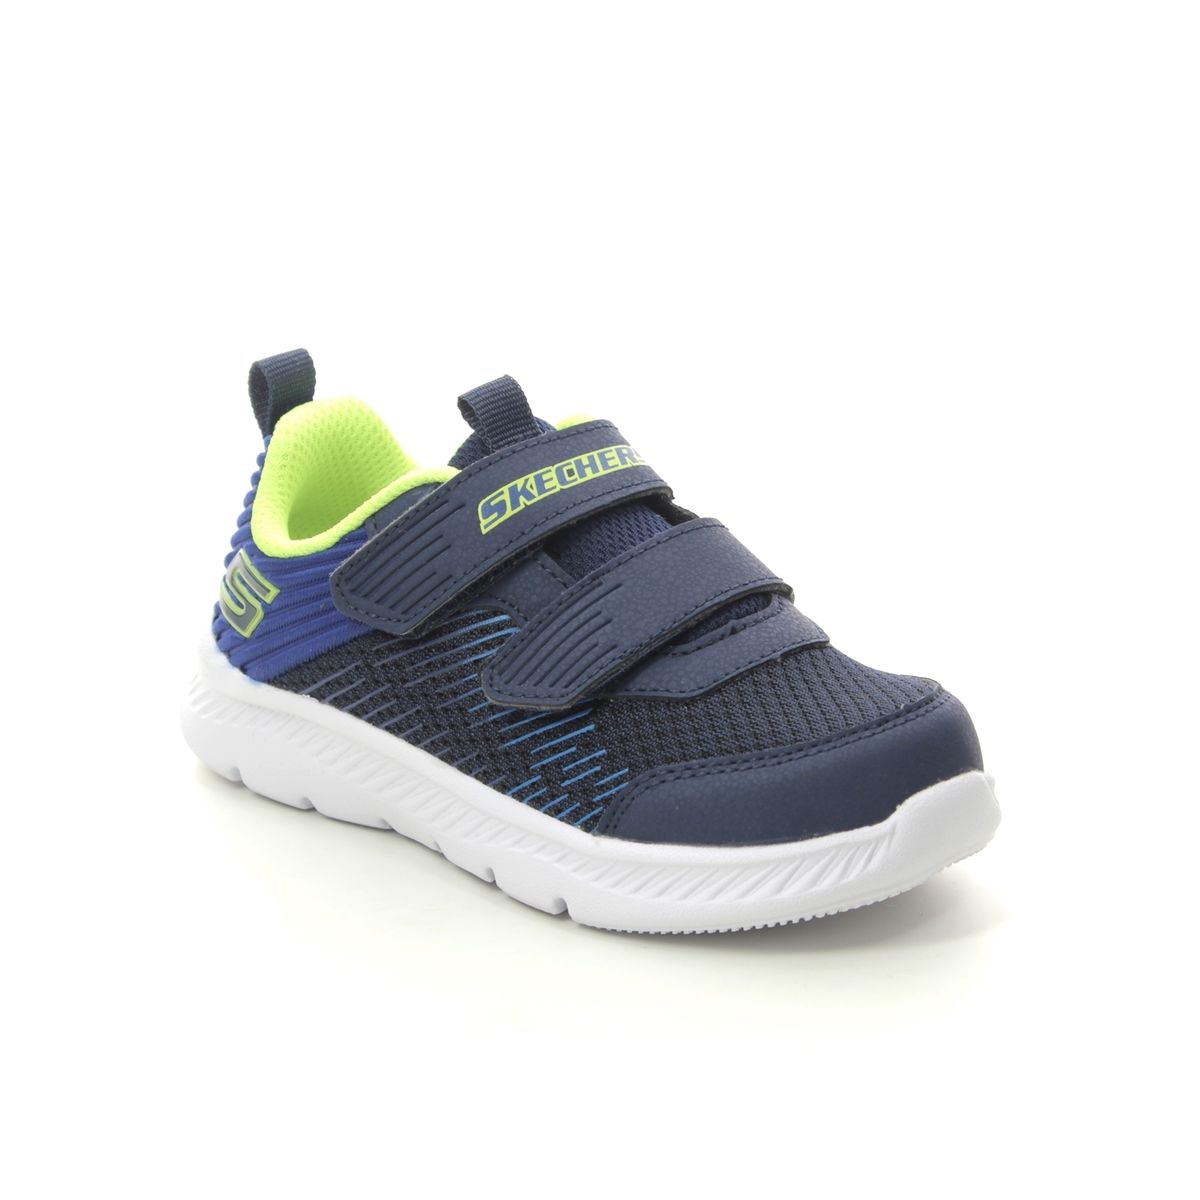 Skechers Comfy Flex 2.0 NVBL Navy Blue Kids trainers 400044N in a Plain Man-made in Size 24